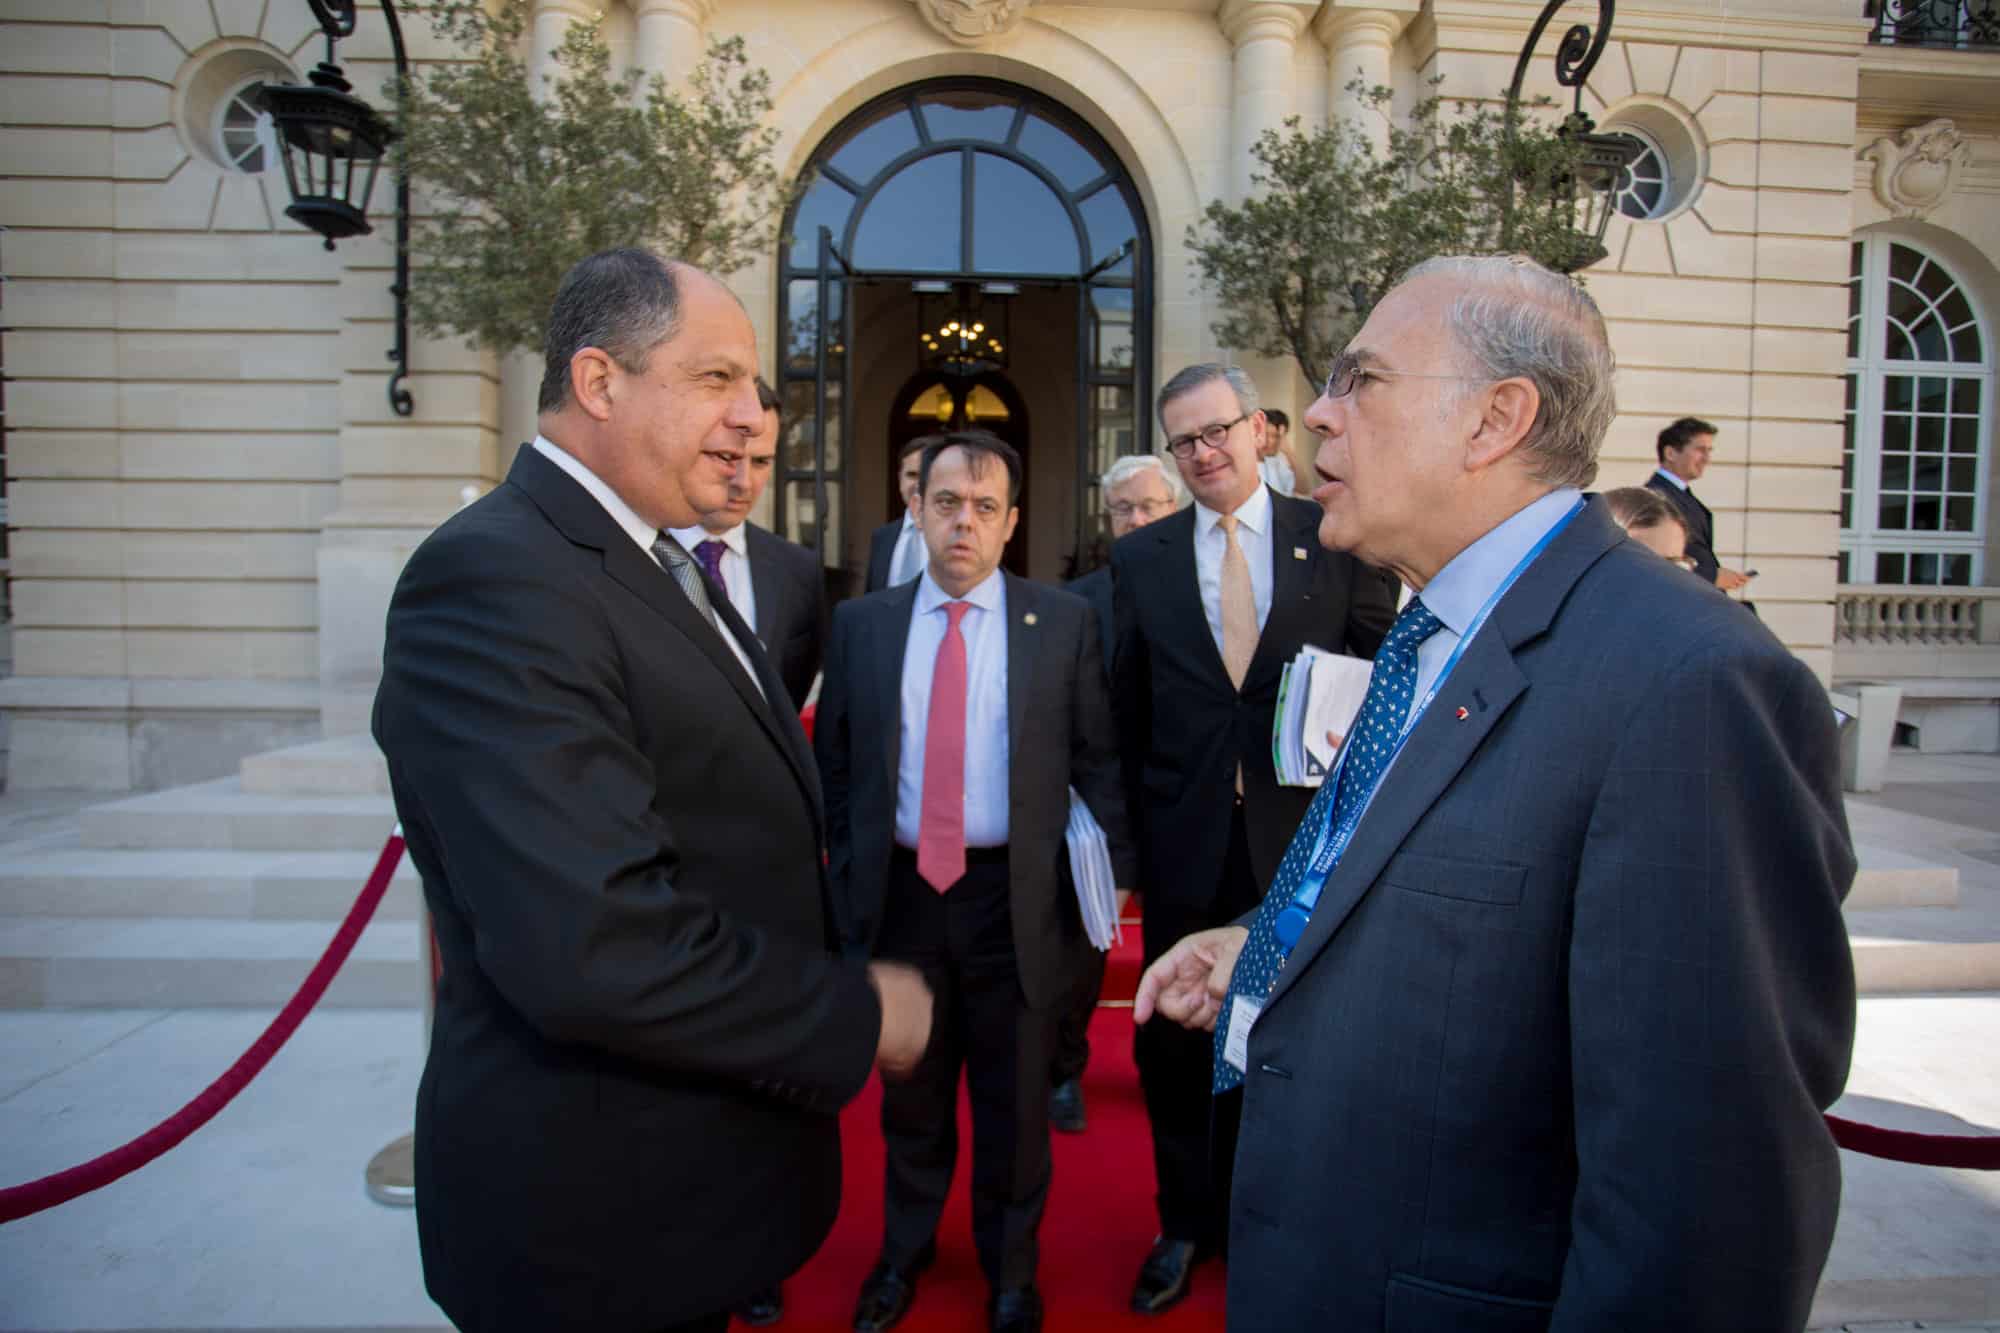 President Luis Guillermo Solís (left) and OECD Secretary-General Ángel Gurría (right) after a meeting in Paris on June 5, 2015.